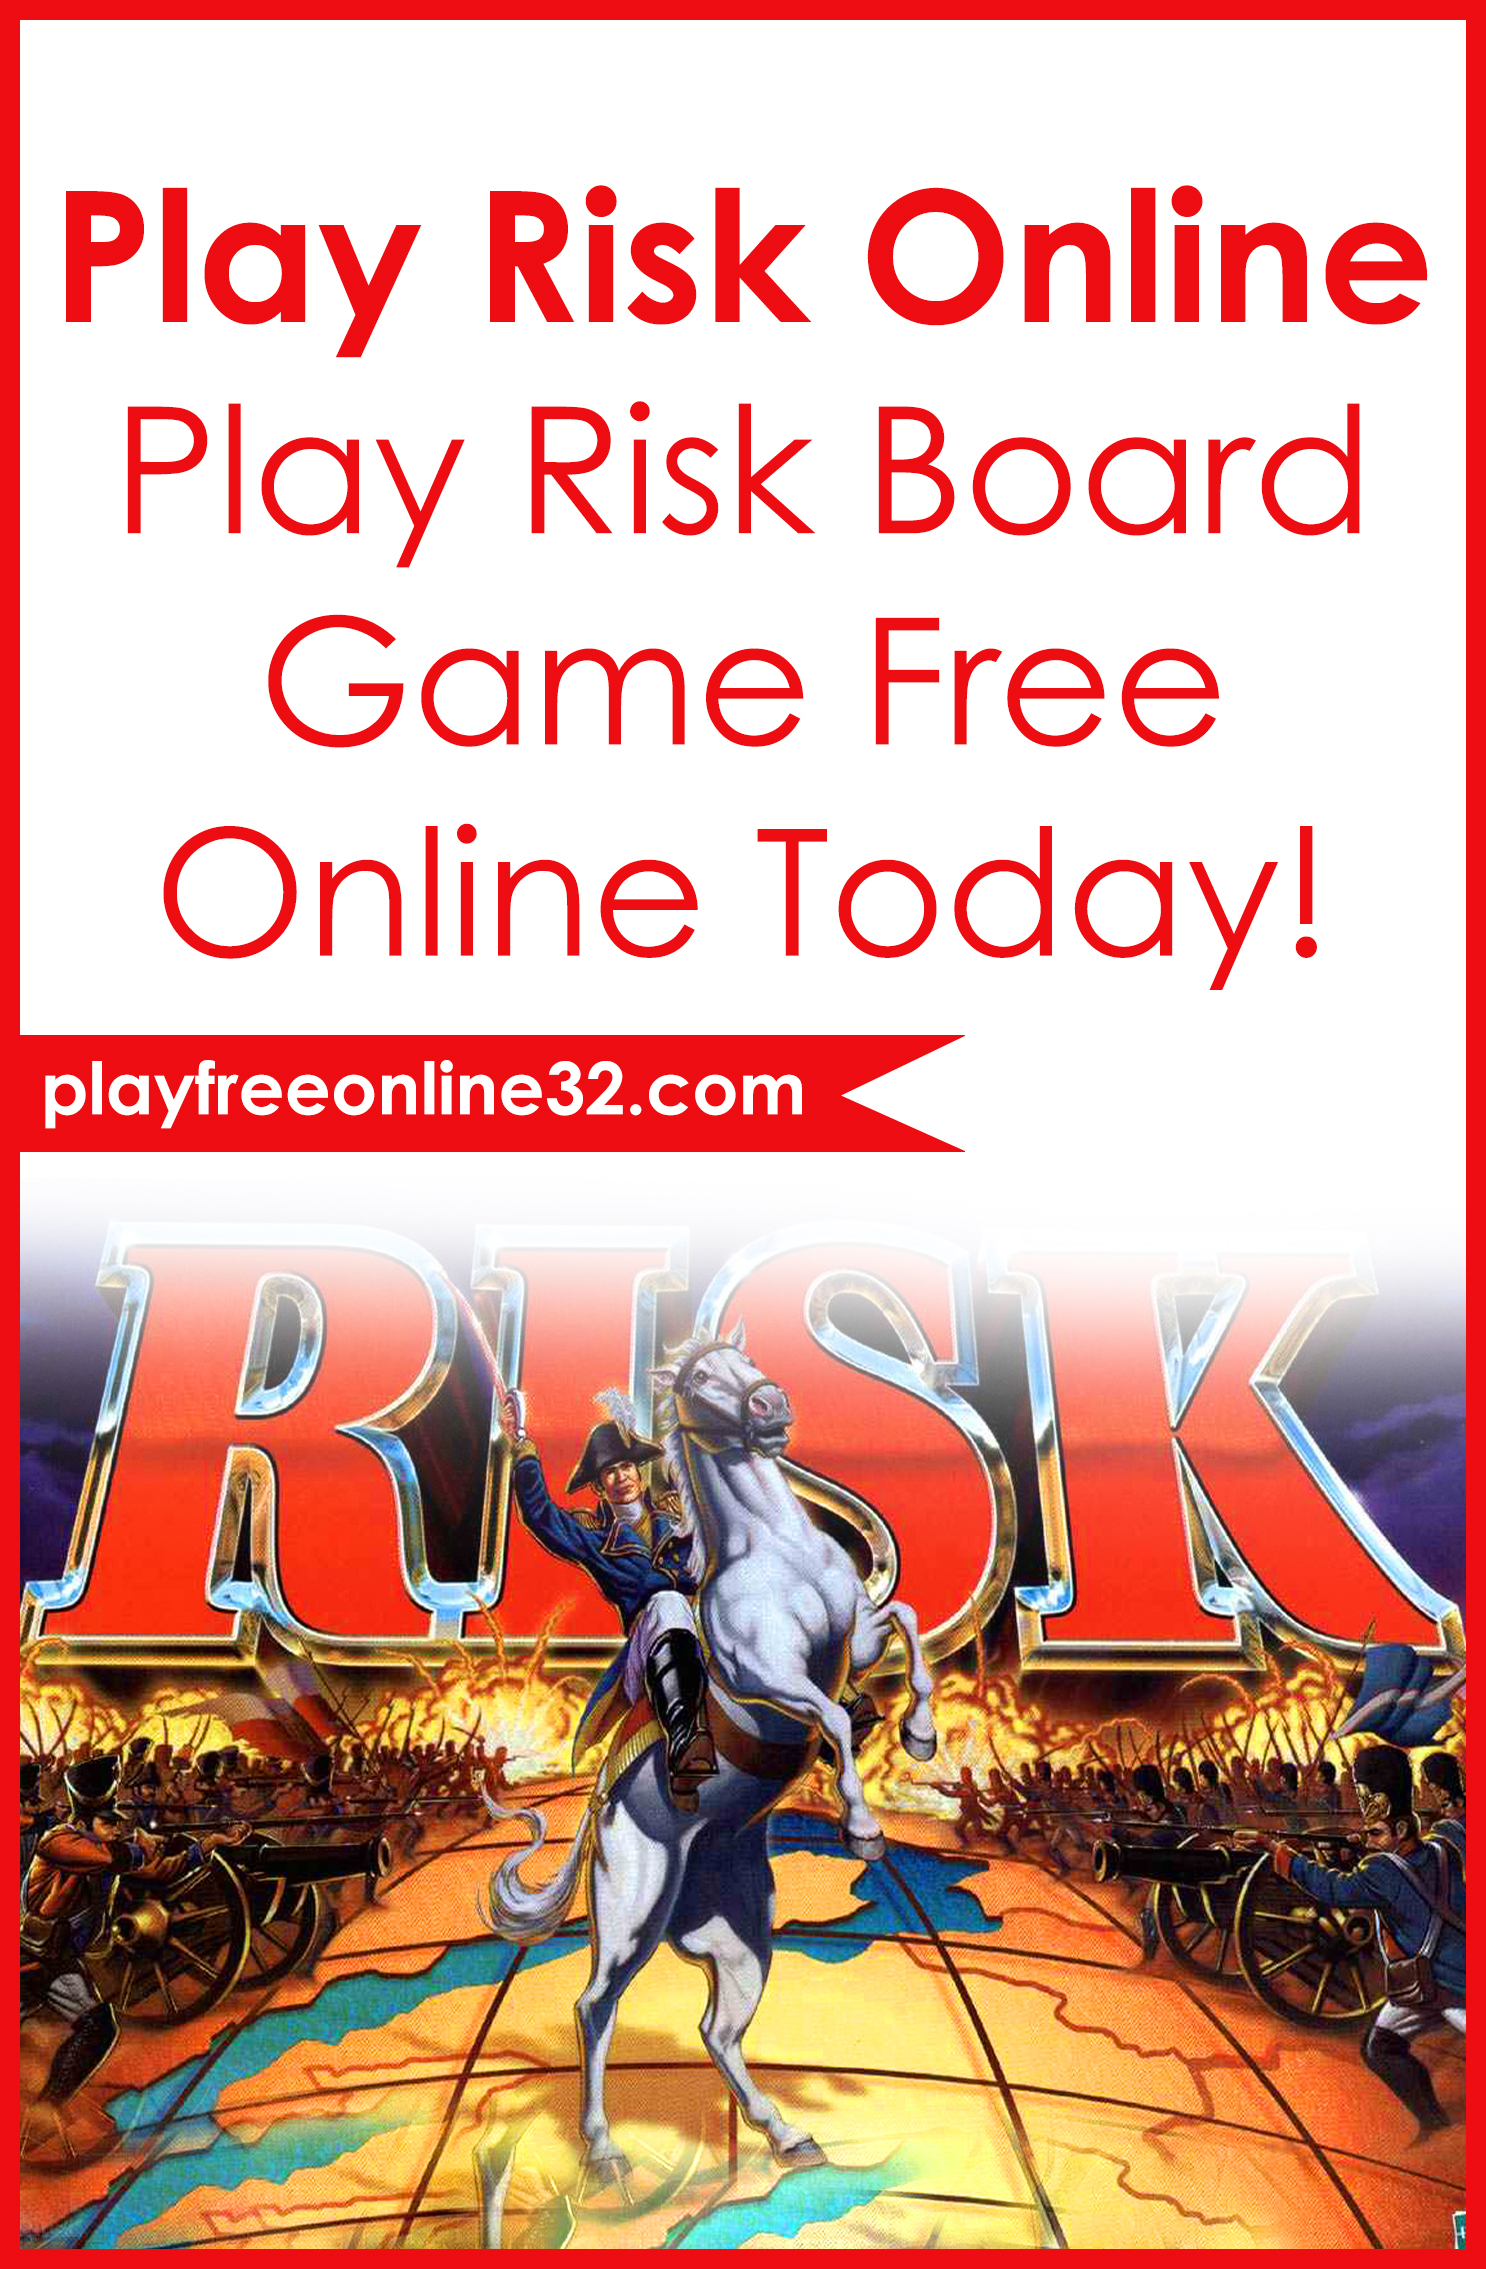 Play Risk Online • Play Risk Board Game Free Online Today!